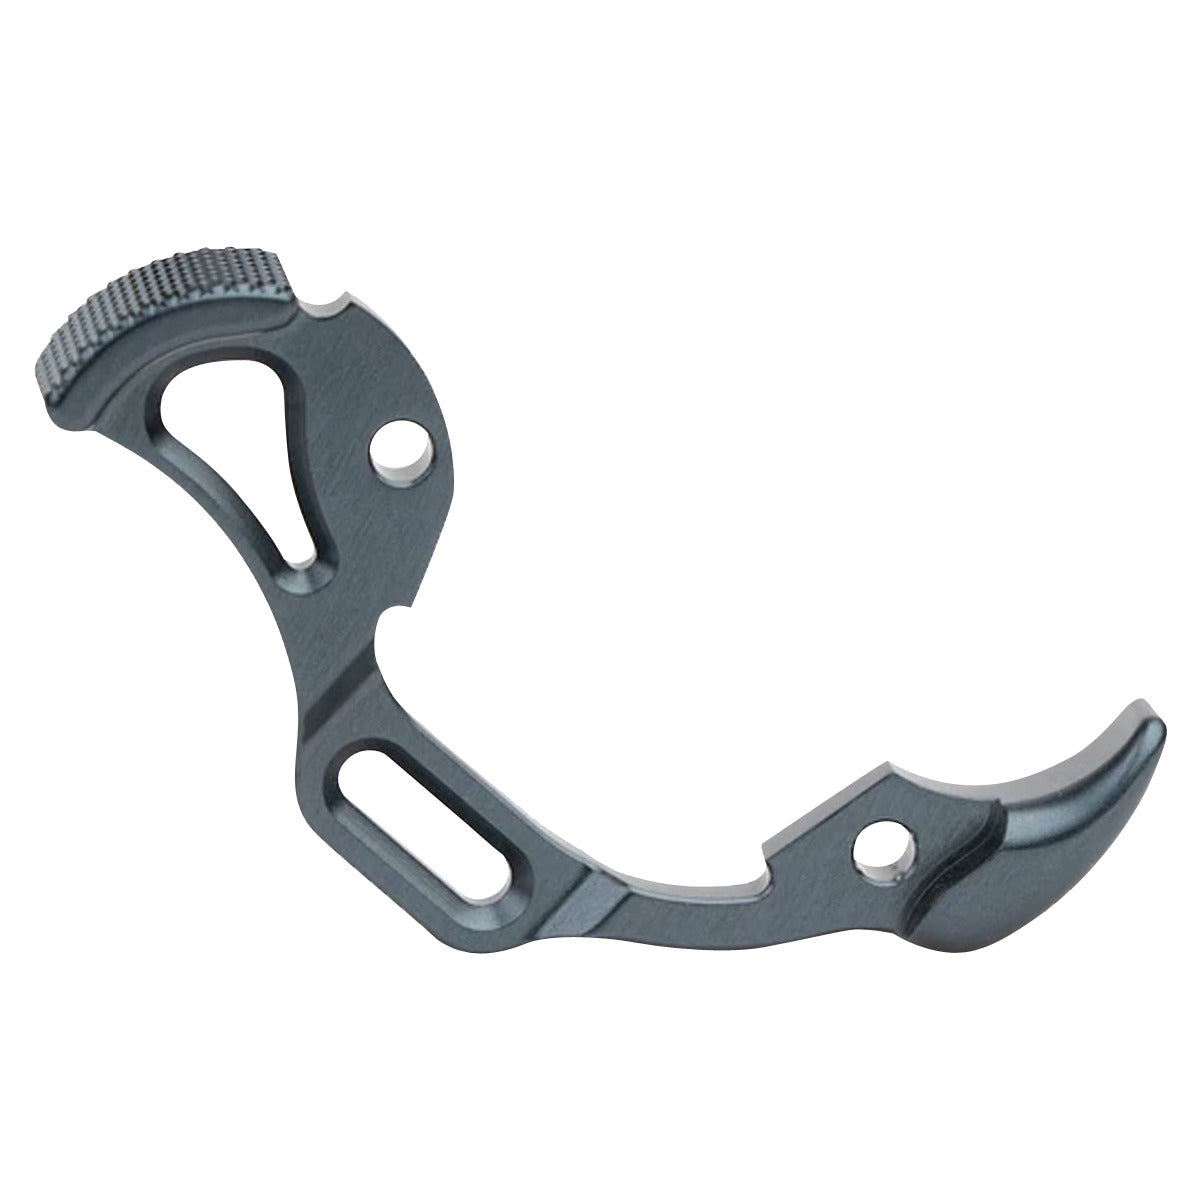 Ultraview Archery The Hinge - Hunting Bracket in  by GOHUNT | Ultraview - GOHUNT Shop